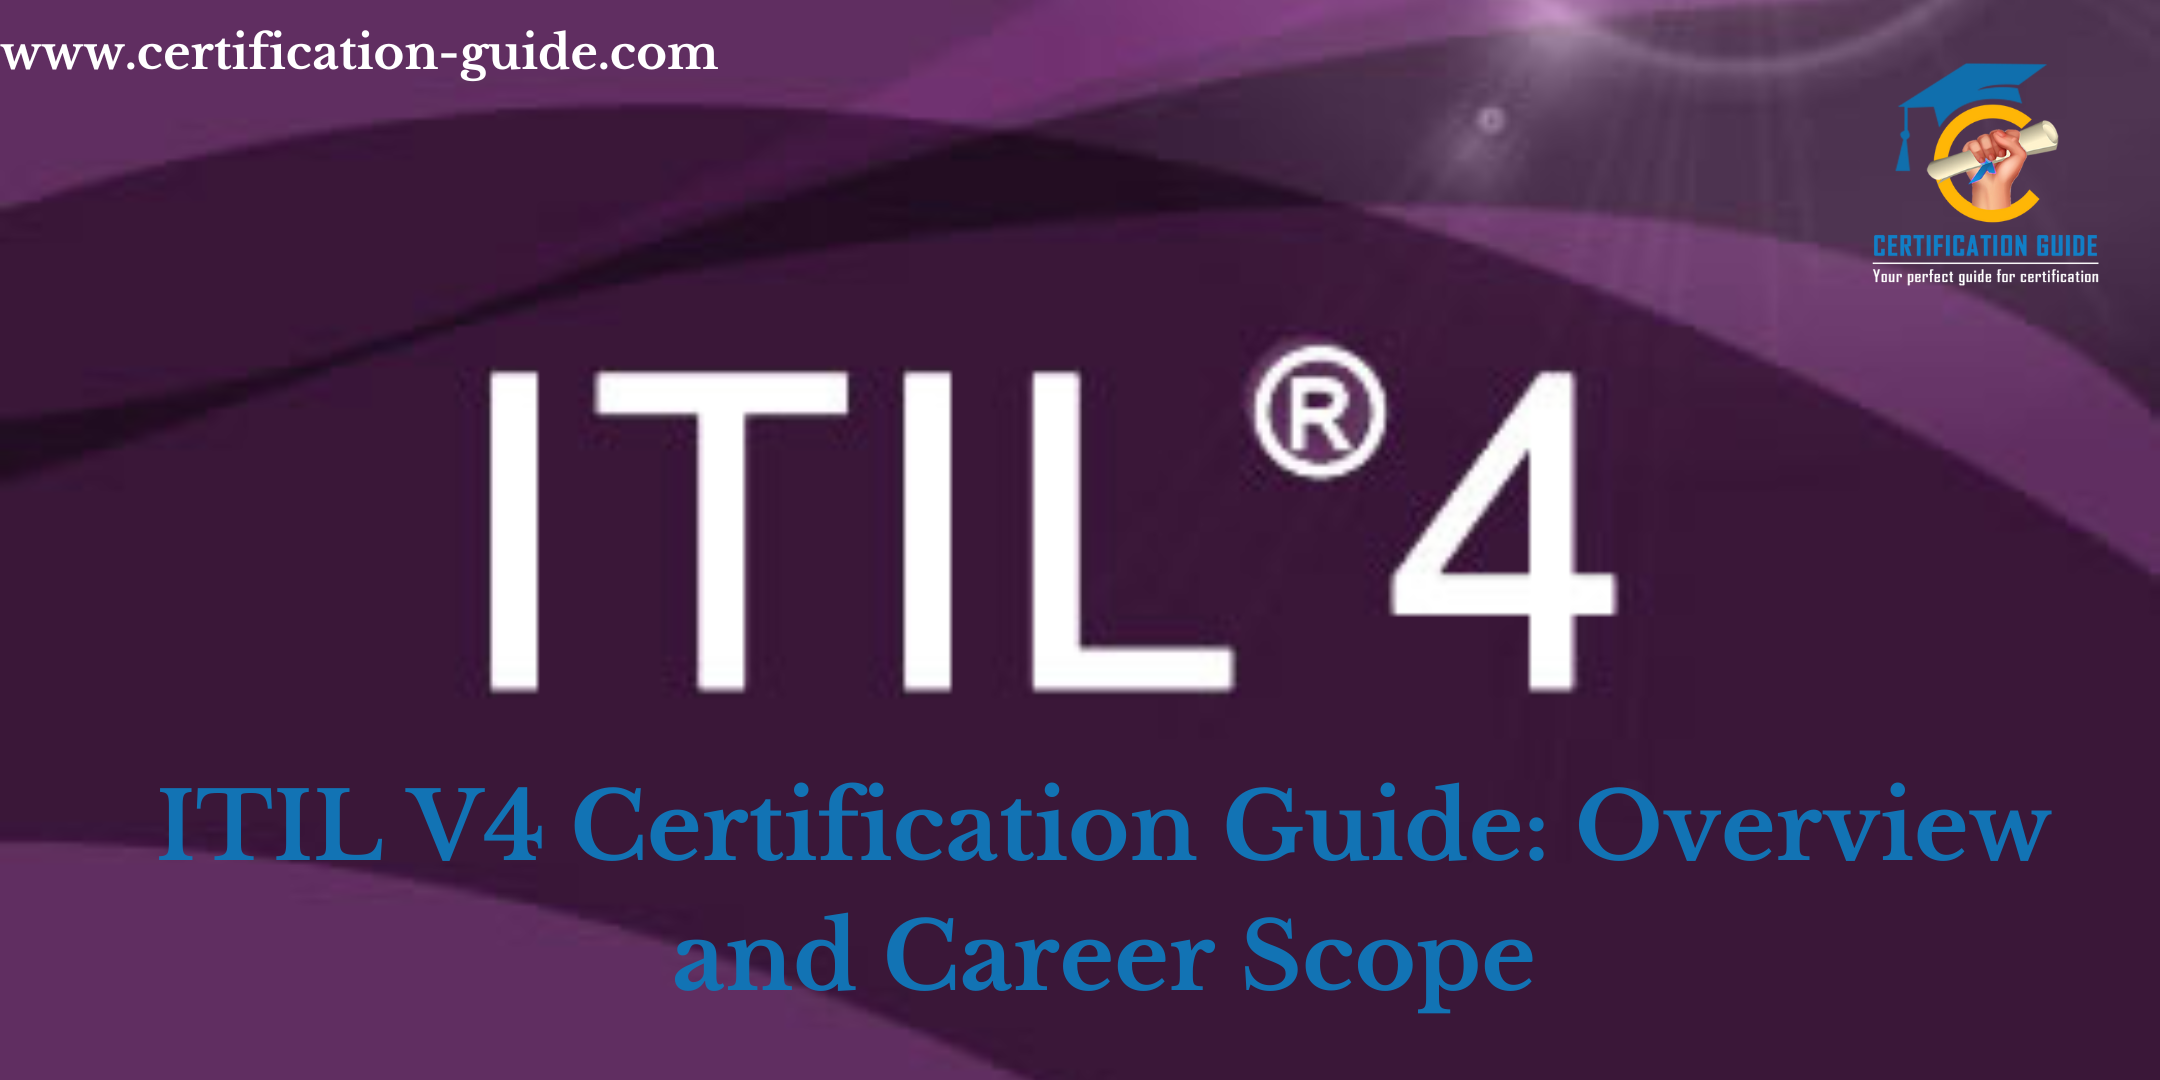 ITIL V4 Certification Guide Overview and Career Scope